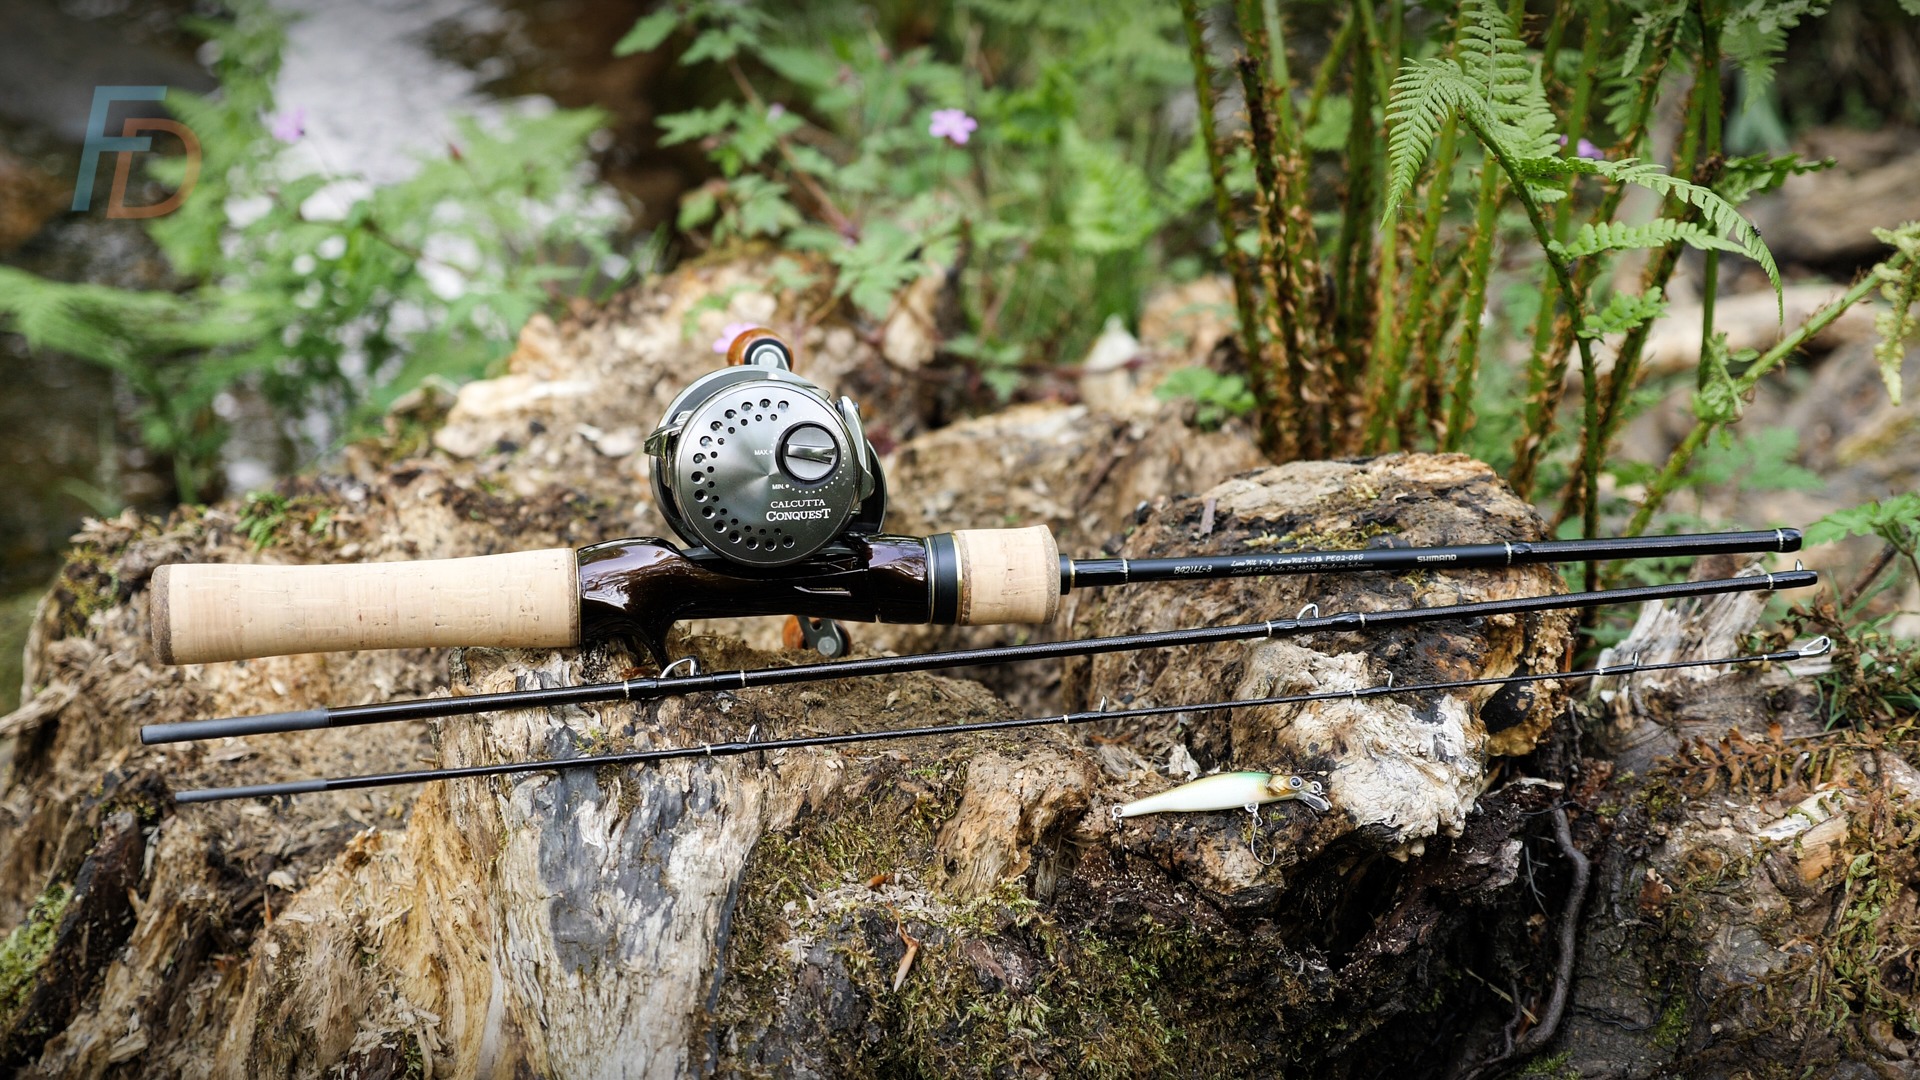 Best Bass Fishing Rod Buying Guide: Which One is Right for You?